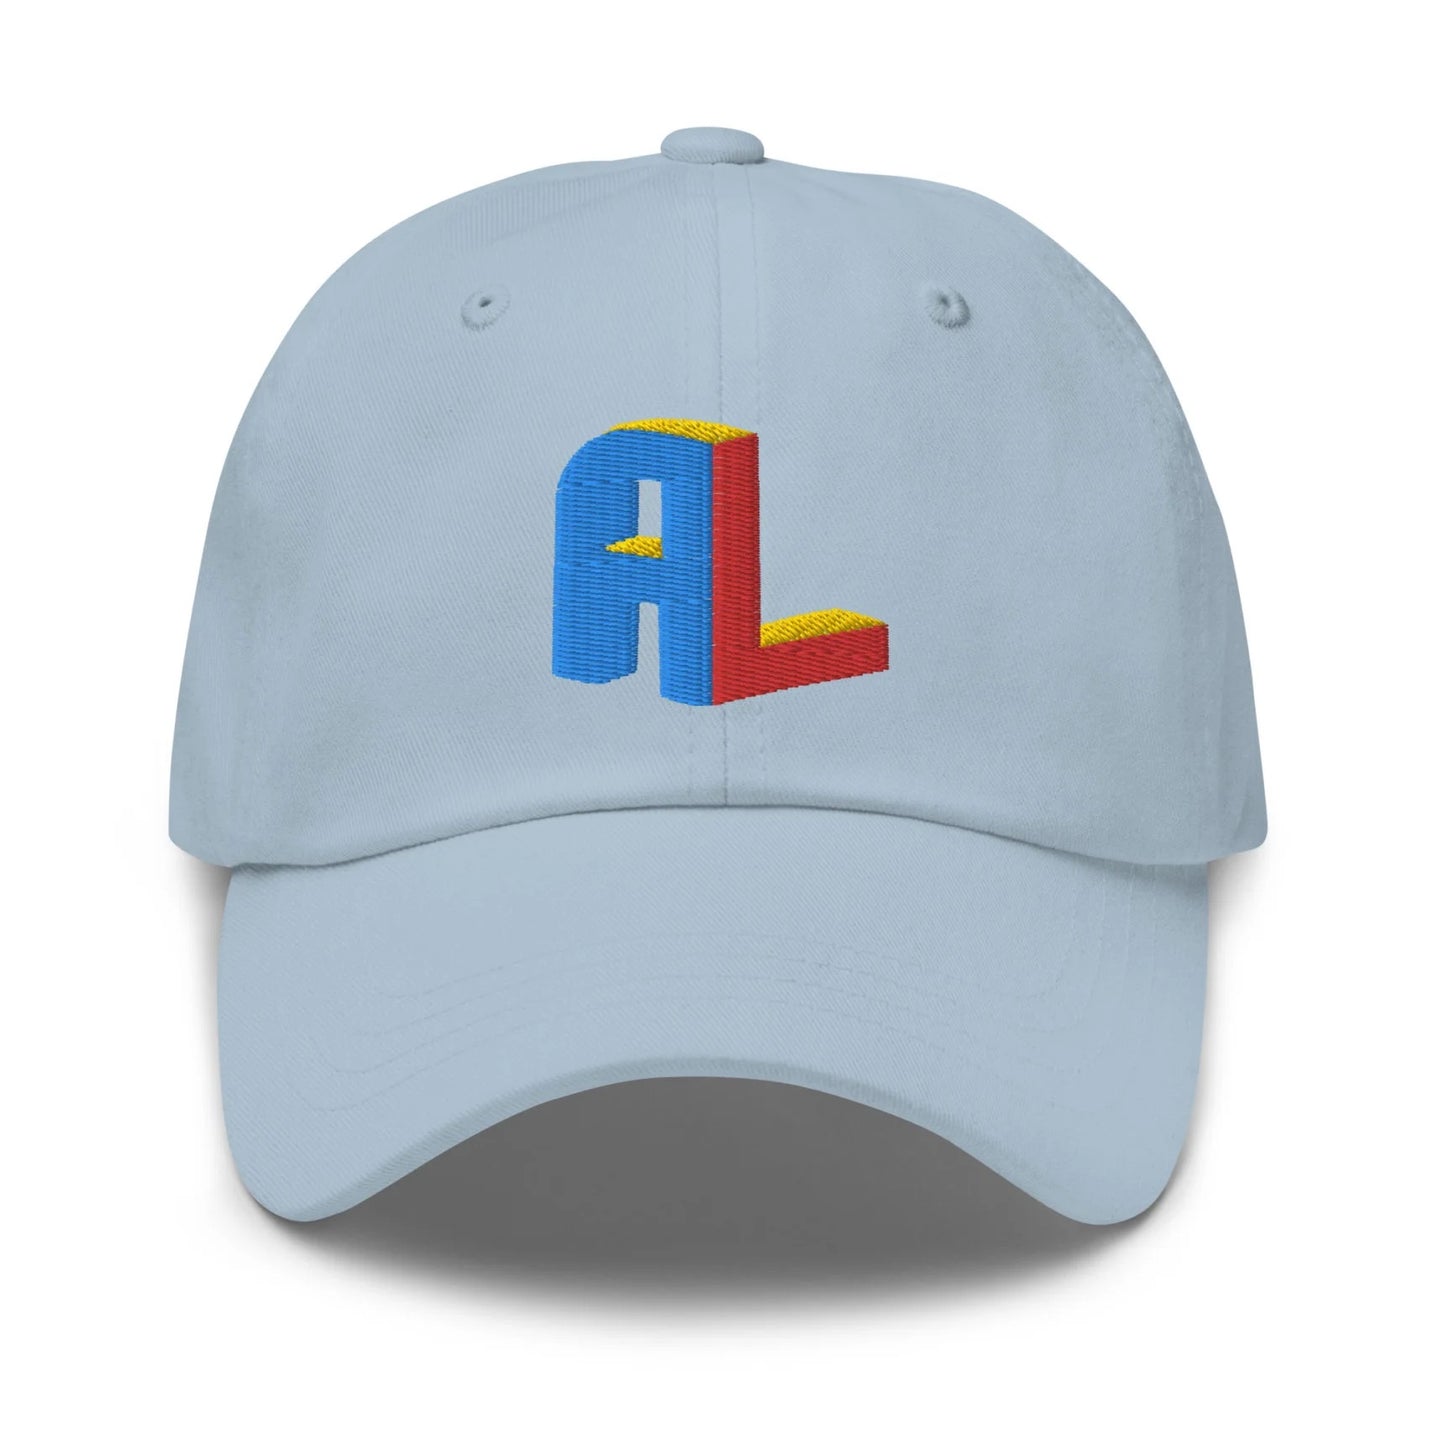 Ance Larmstrong ShowZone baseball dad hat in light blue